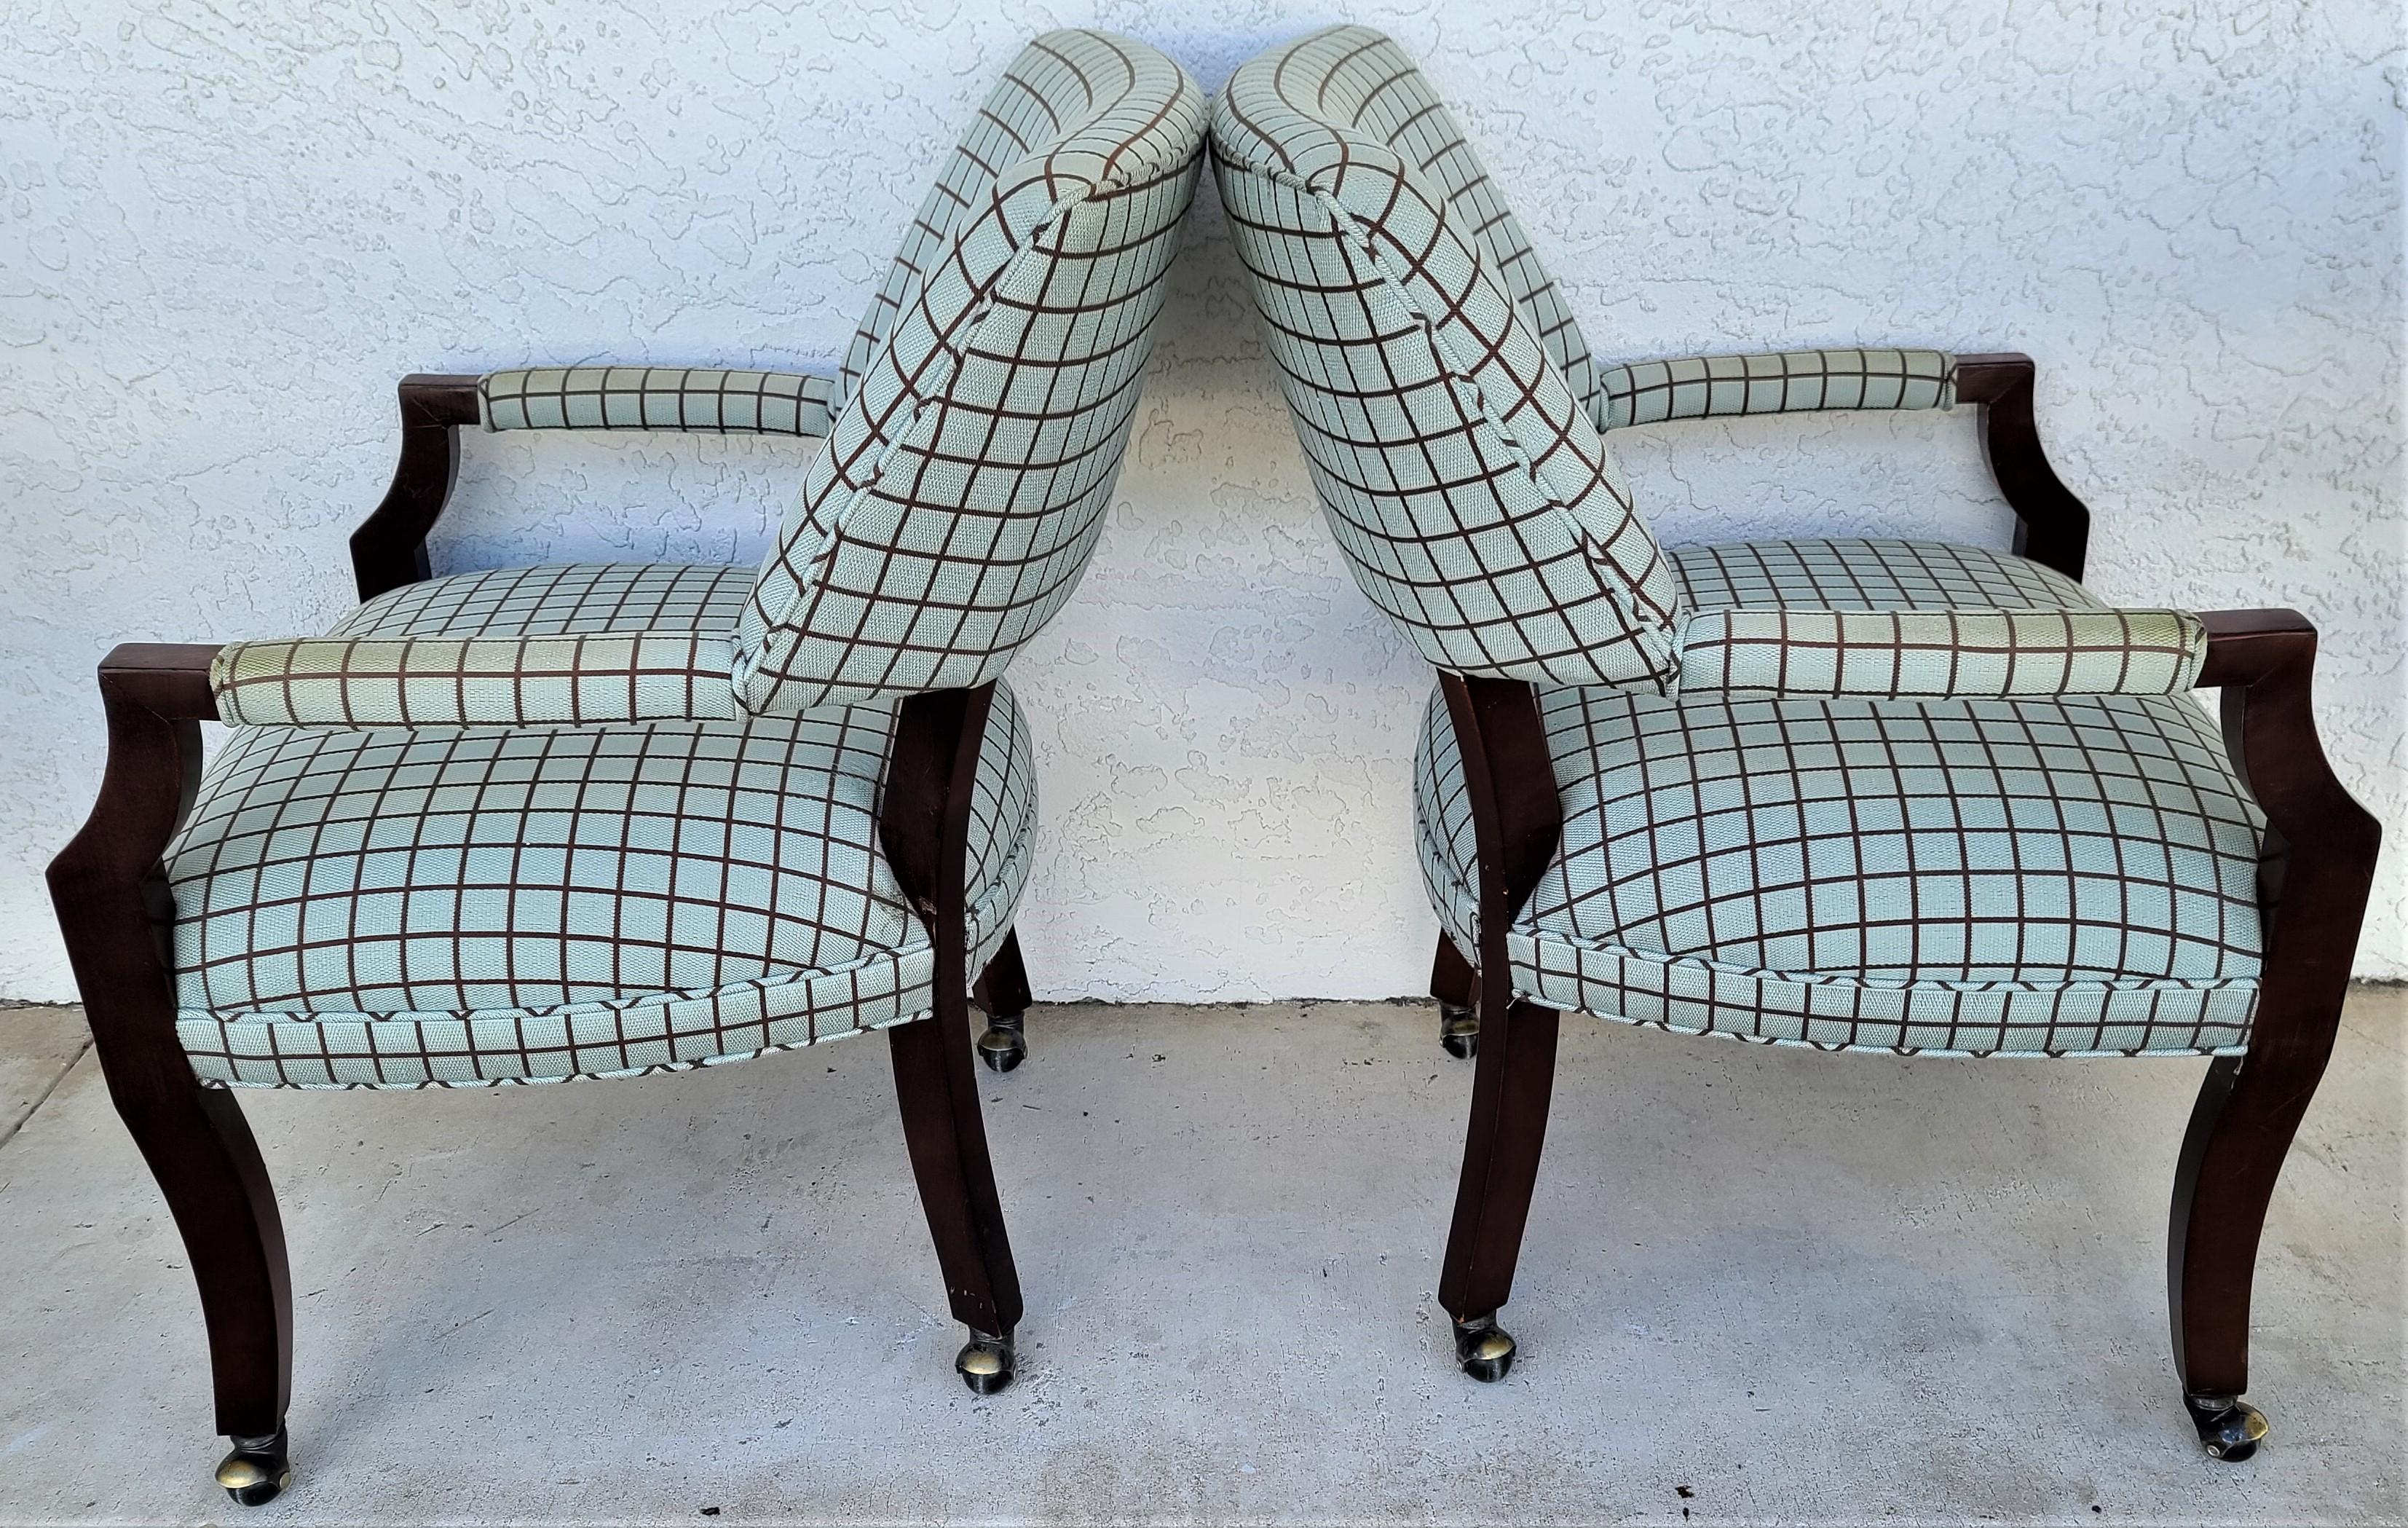 Offering one of our recent Palm Beach Estate fine furniture acquisitions of a
Set of 4 Michael Weiss for Vanguard Furniture rolling dining game armchairs
Very comfortable with spring-supported seats and lots of back support.

Approximate